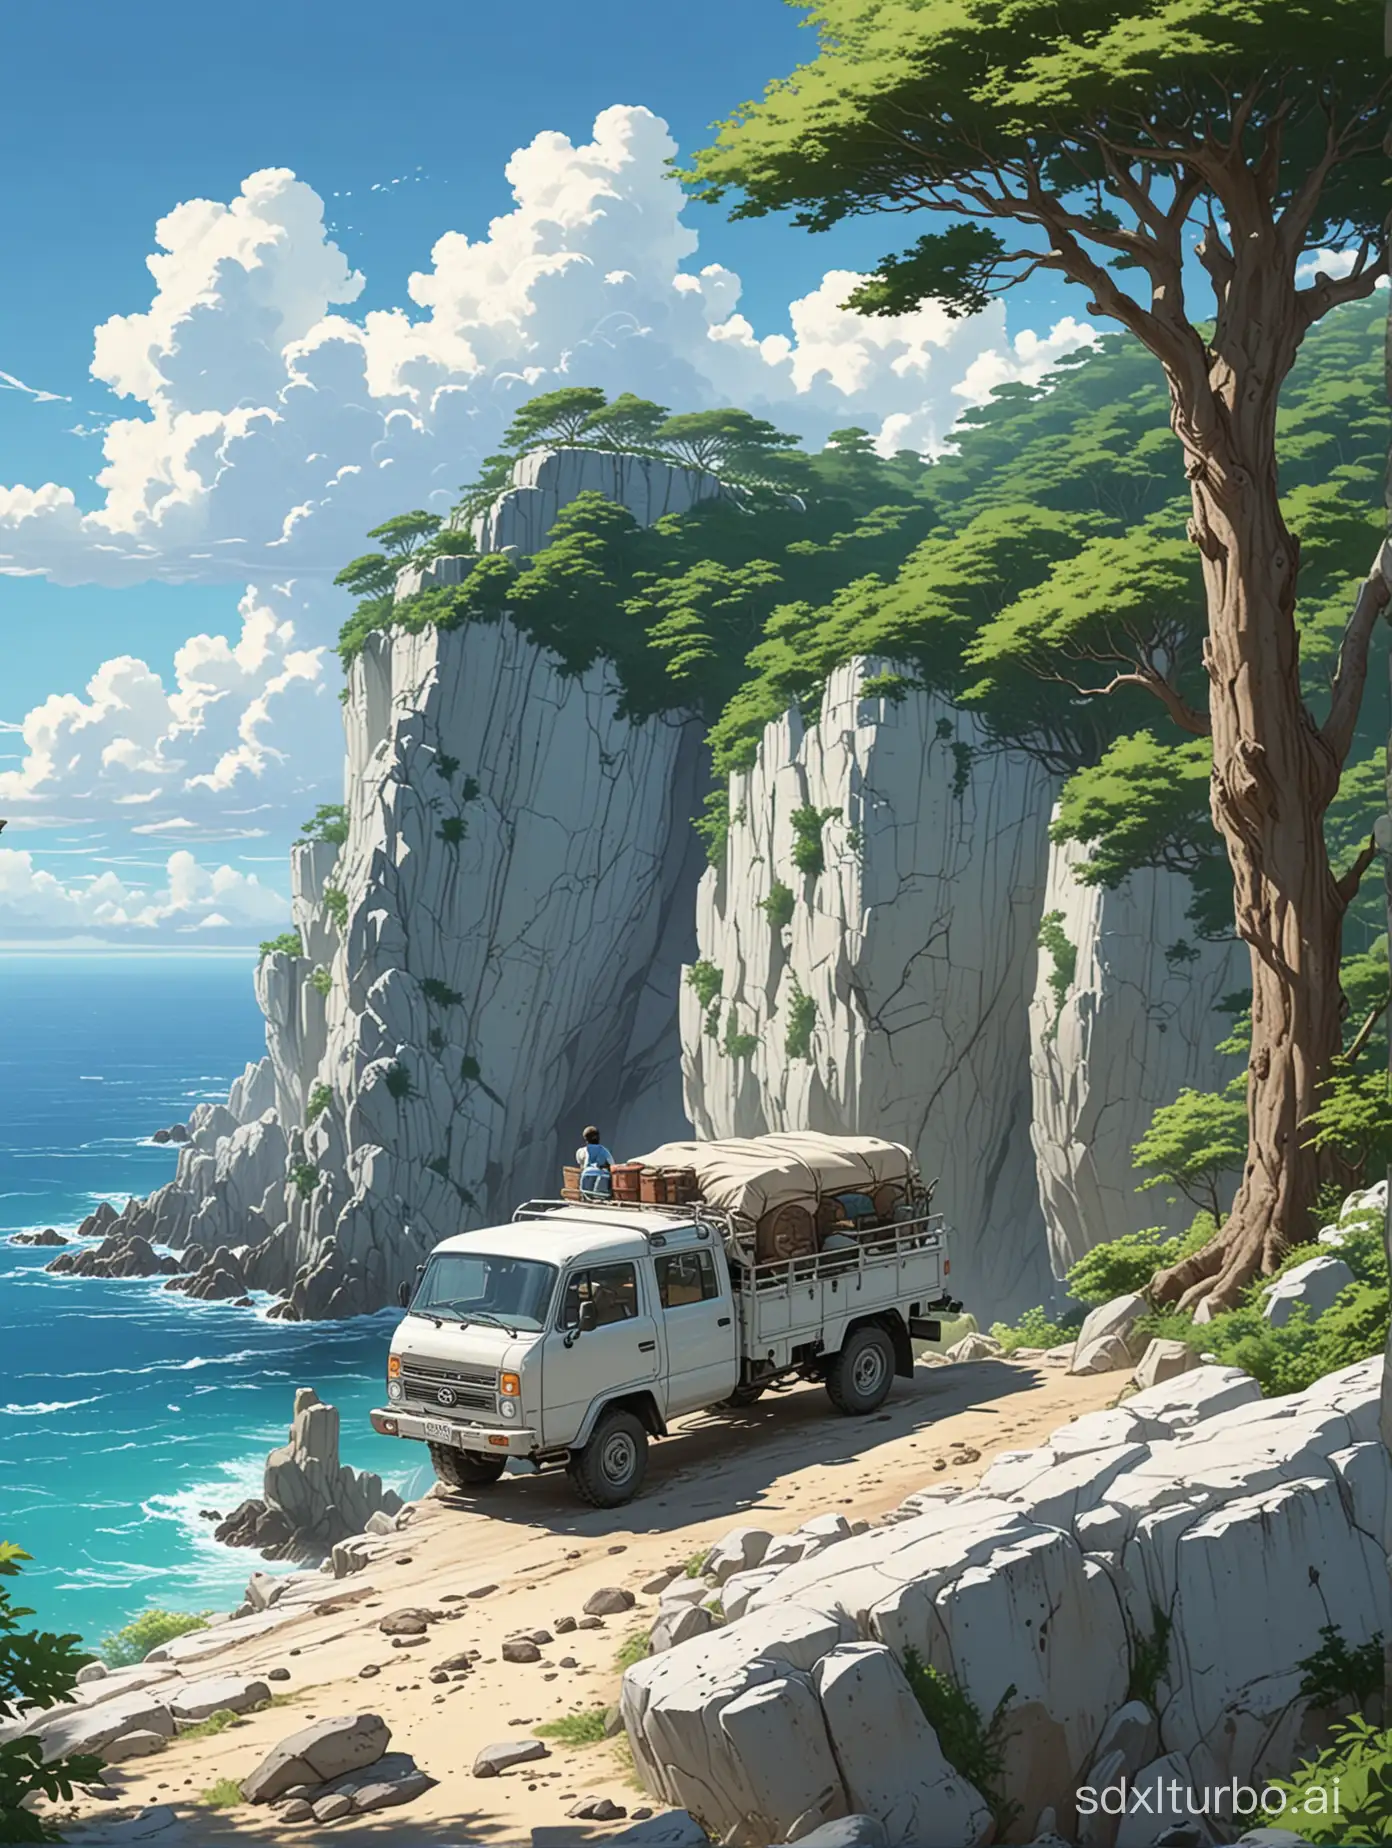 A Studio Ghibli anime style,a super high cliff,a 4x4 truck on the edge,white rocks,huge trees,ocean overview,blue sky,fluffy white clouds ,a boy on the edge watching the beautiful view